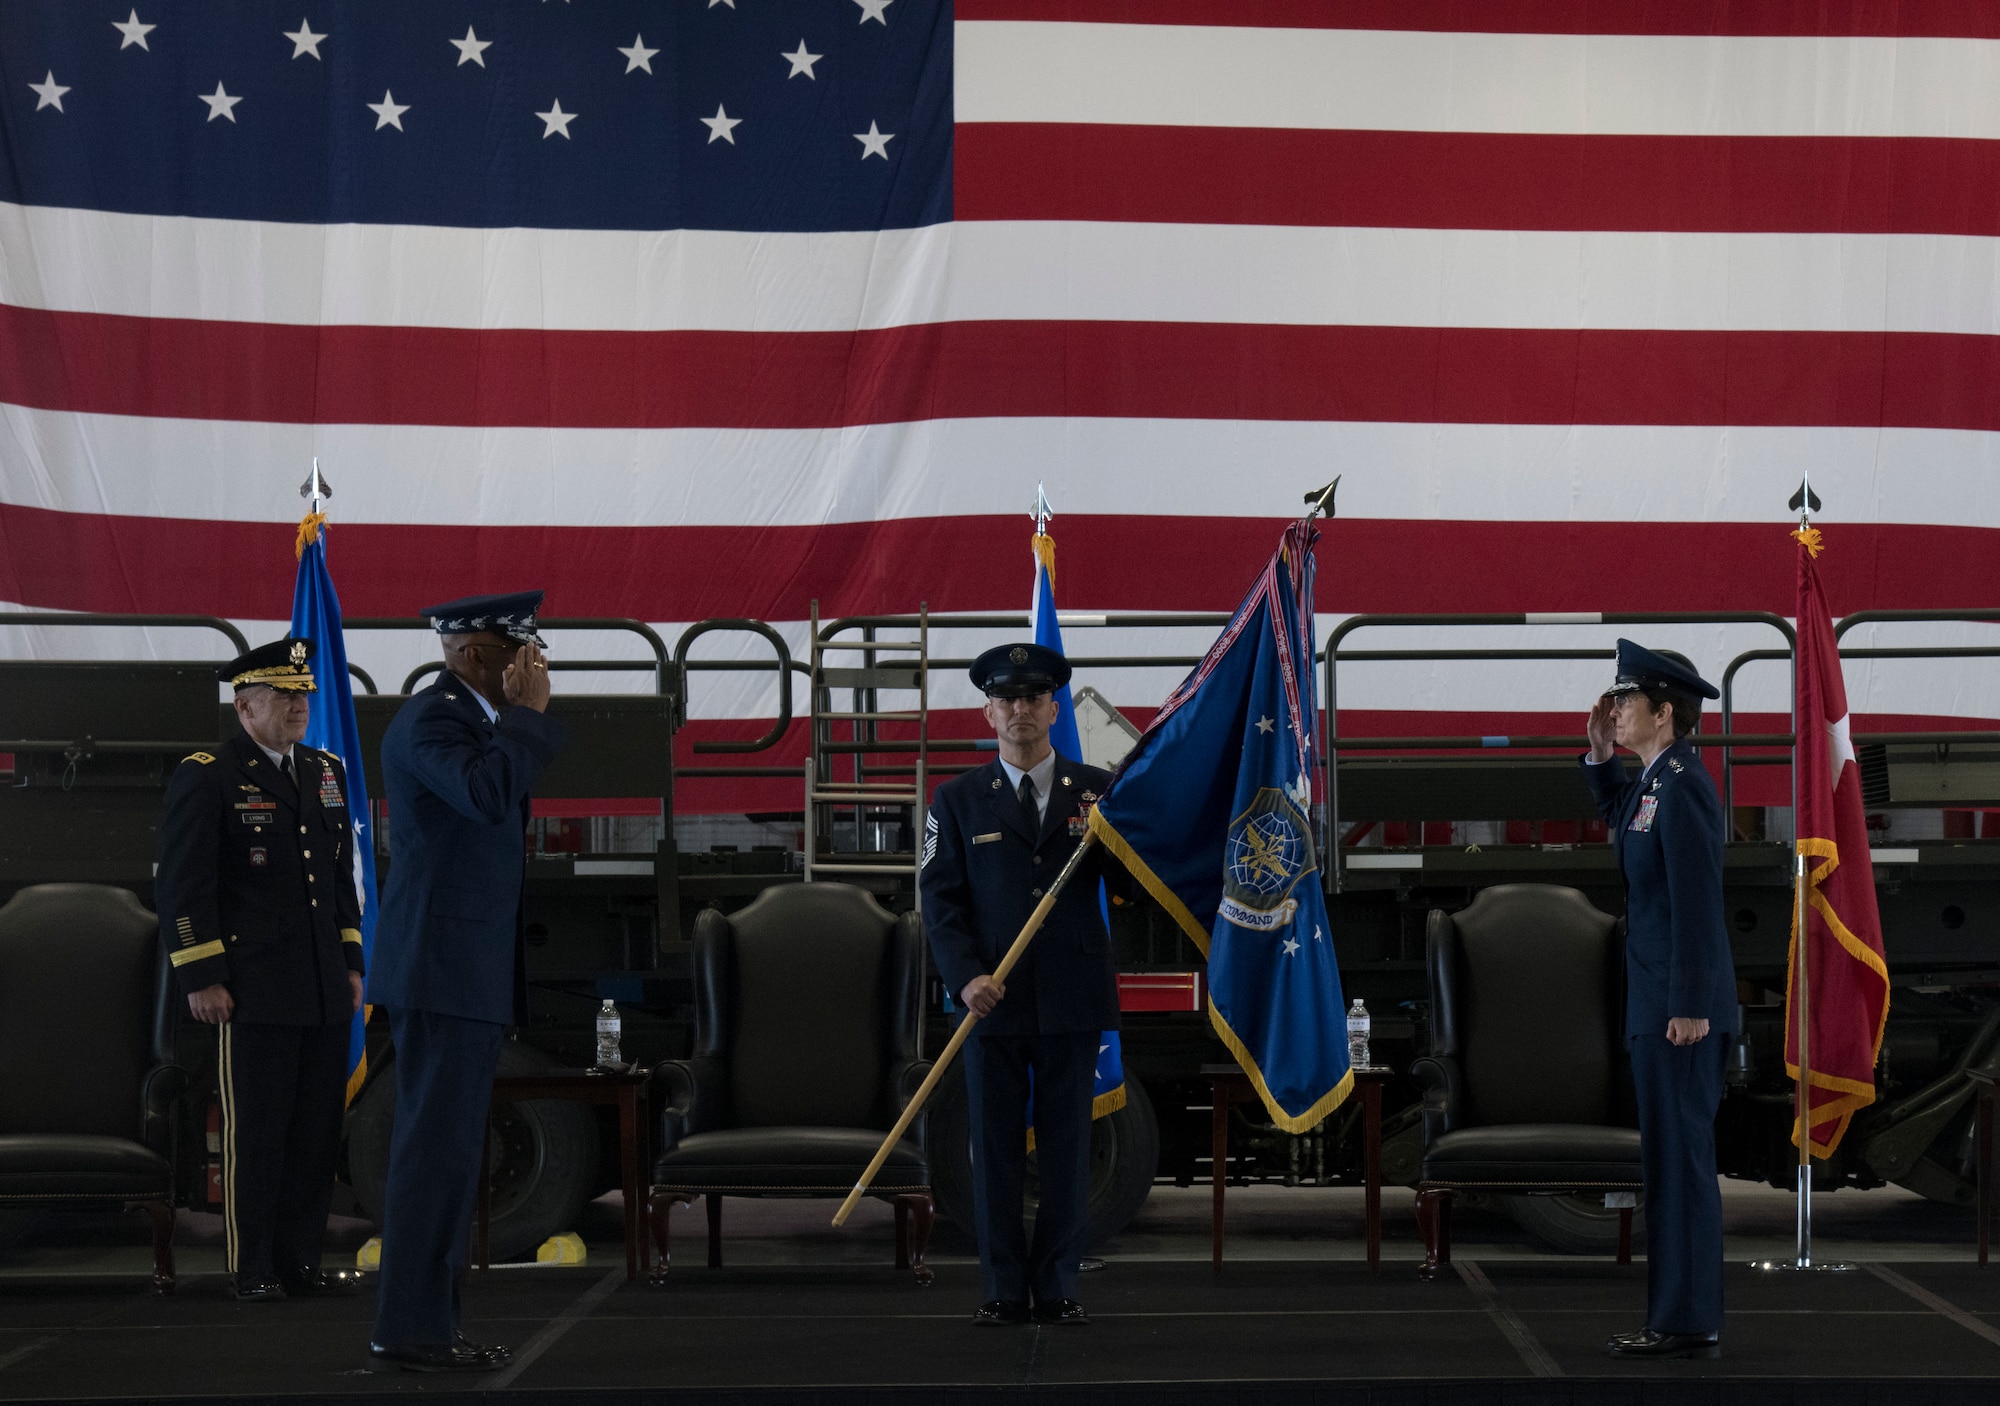 Gen. Jacqueline D. Van Ovost, commander of Air Mobility Command, right, salutes Gen. Charles Q. Brown, Jr., Chief of Staff of the Air Force, during the AMC change of command ceremony at Scott Air Force Base, Illinois, Aug. 20, 2020. The ceremony marked a historic Air Force first with back-to-back female generals commanding a major command.. (U.S. Air Force photo by Senior Airman Solomon Cook)